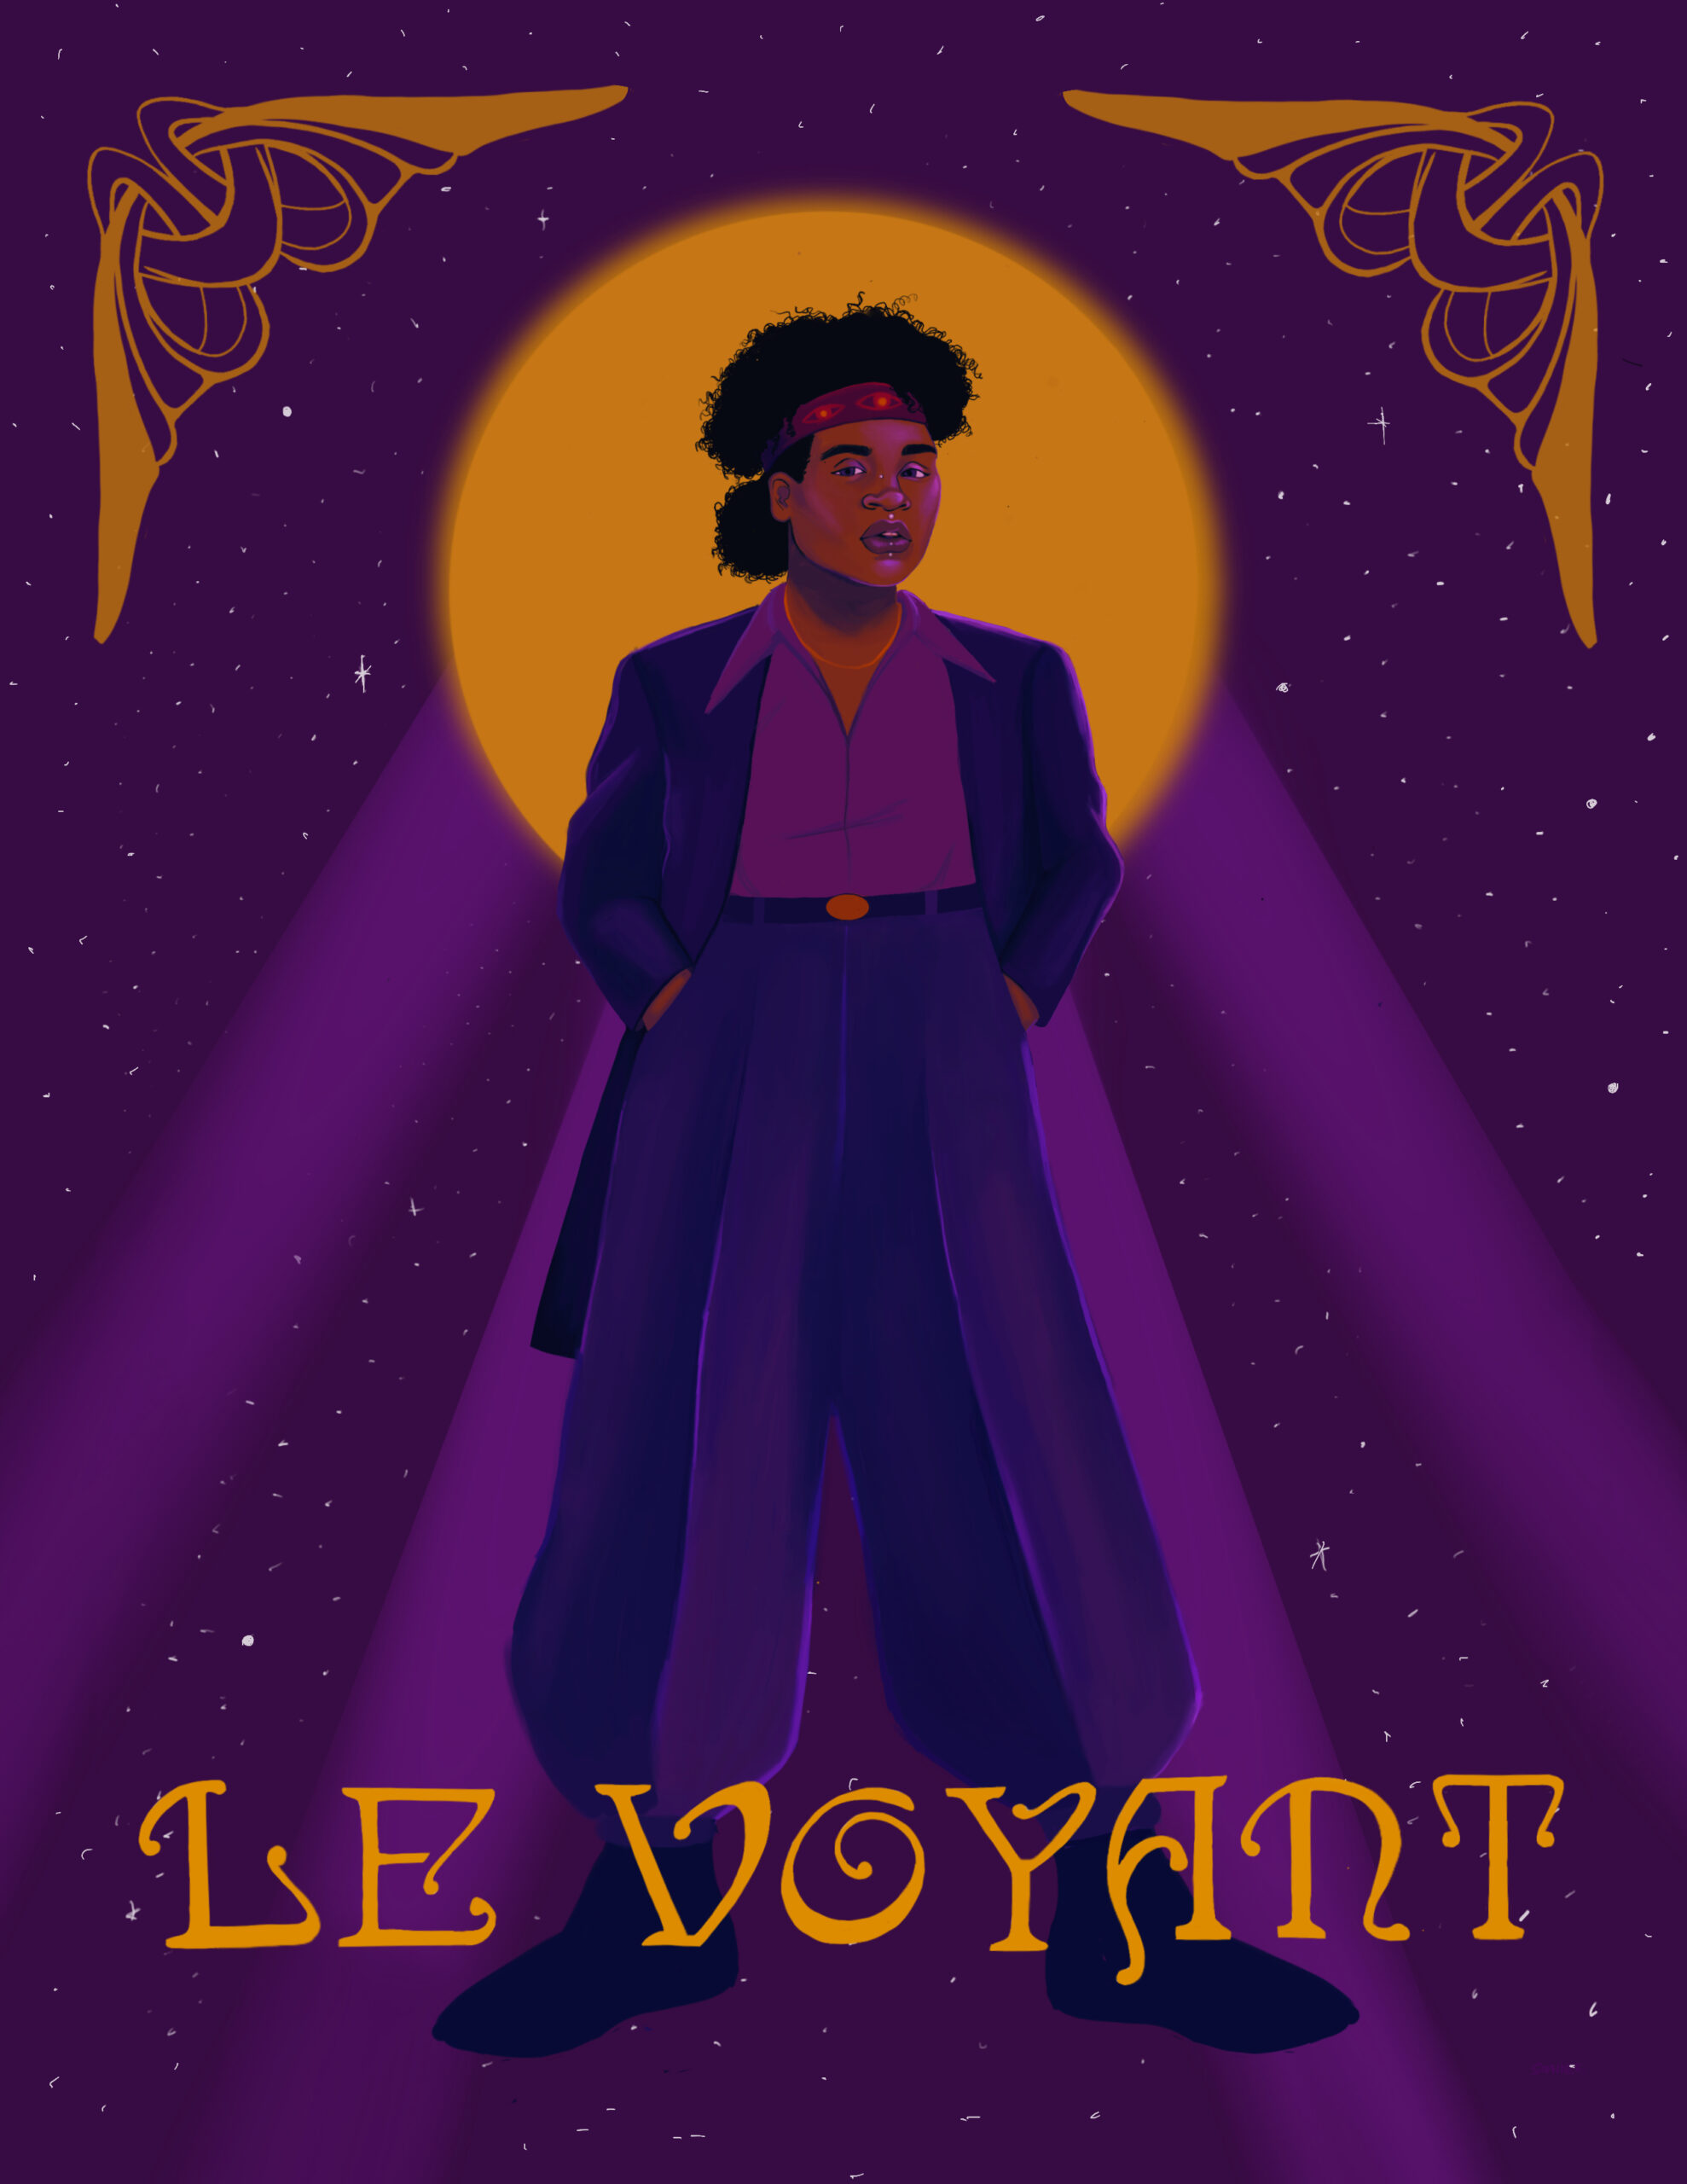 An illustration by Sophie Fesser depicts a character named Le Voyant, from their transgender superhero comic book. These superheroes are based on BIPOC trans community members Fesser met through the Minnesota Transgender Health Coalition.